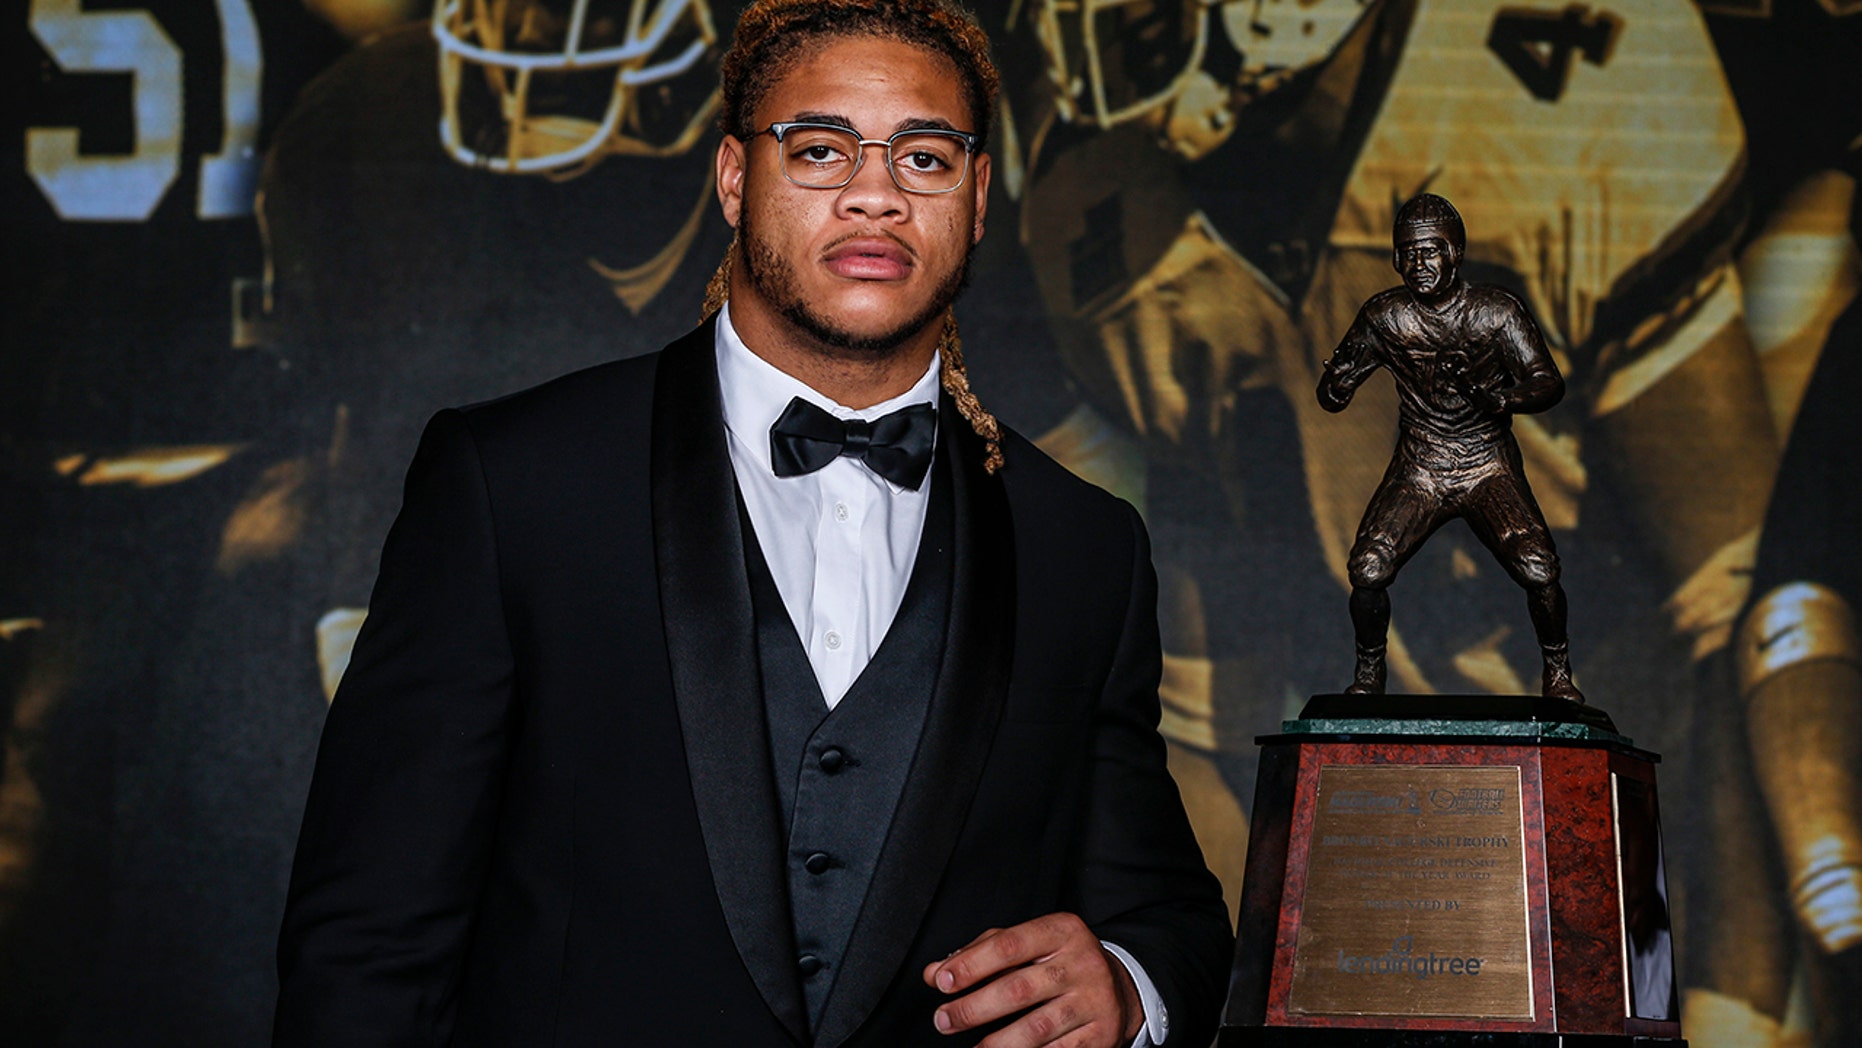 Ohio State defensive end Chase Young poses with the The 2019 Bronko Nagurski Award before the awards banquet in Charlotte, N.C., Monday, Dec. 9, 2019. (AP Photo/Nell Redmond)